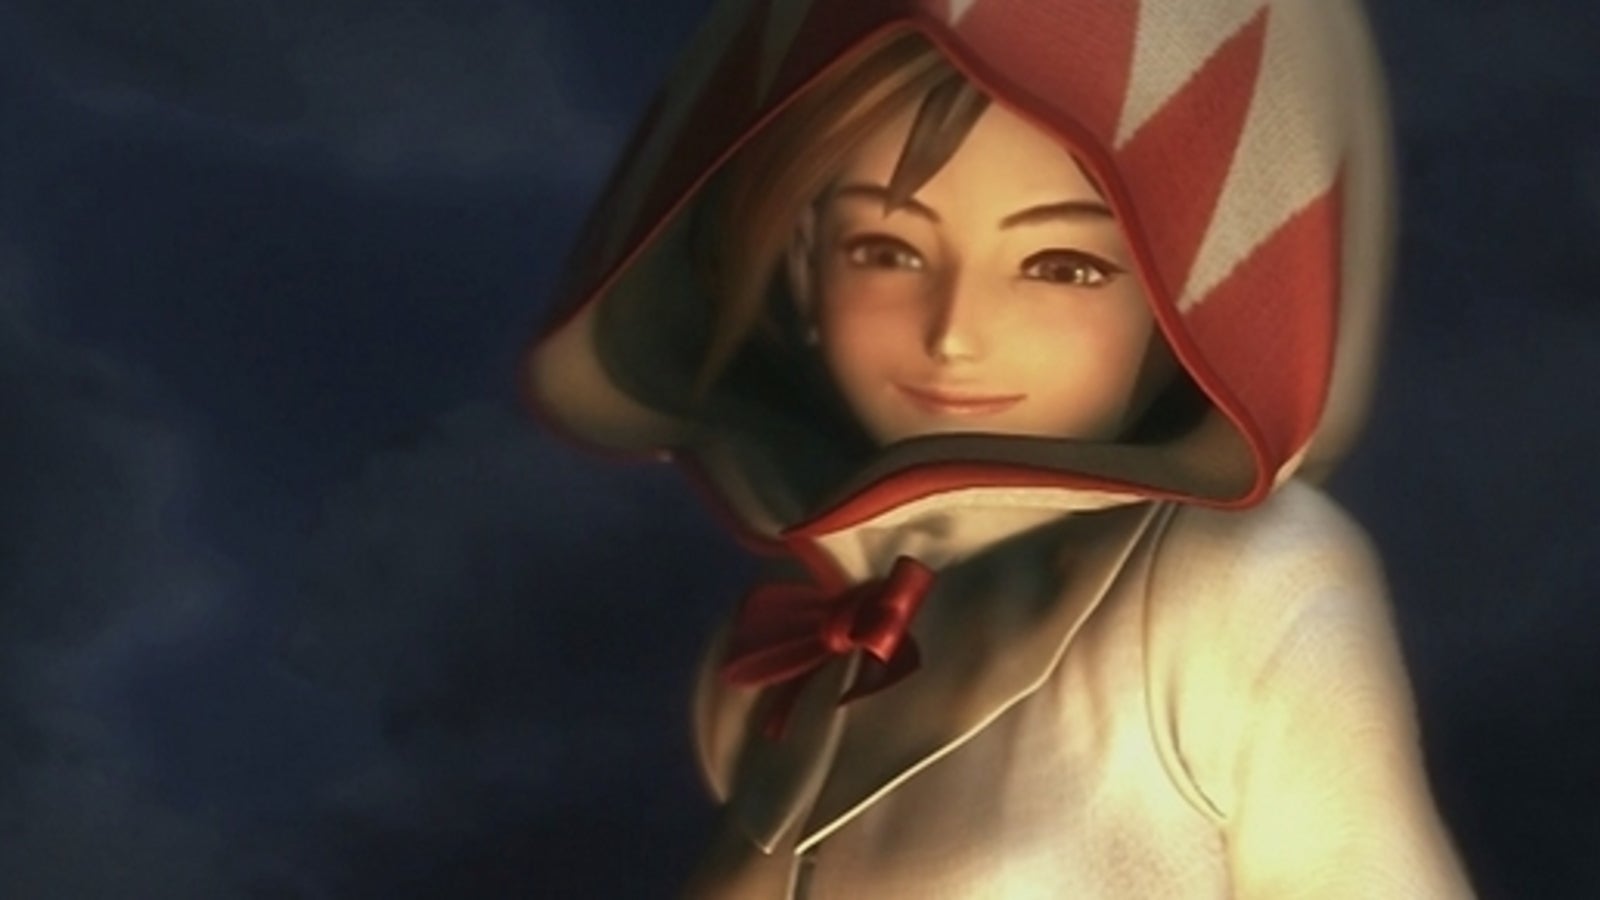 Final Fantasy 9 animated series will reportedly be shown this week 